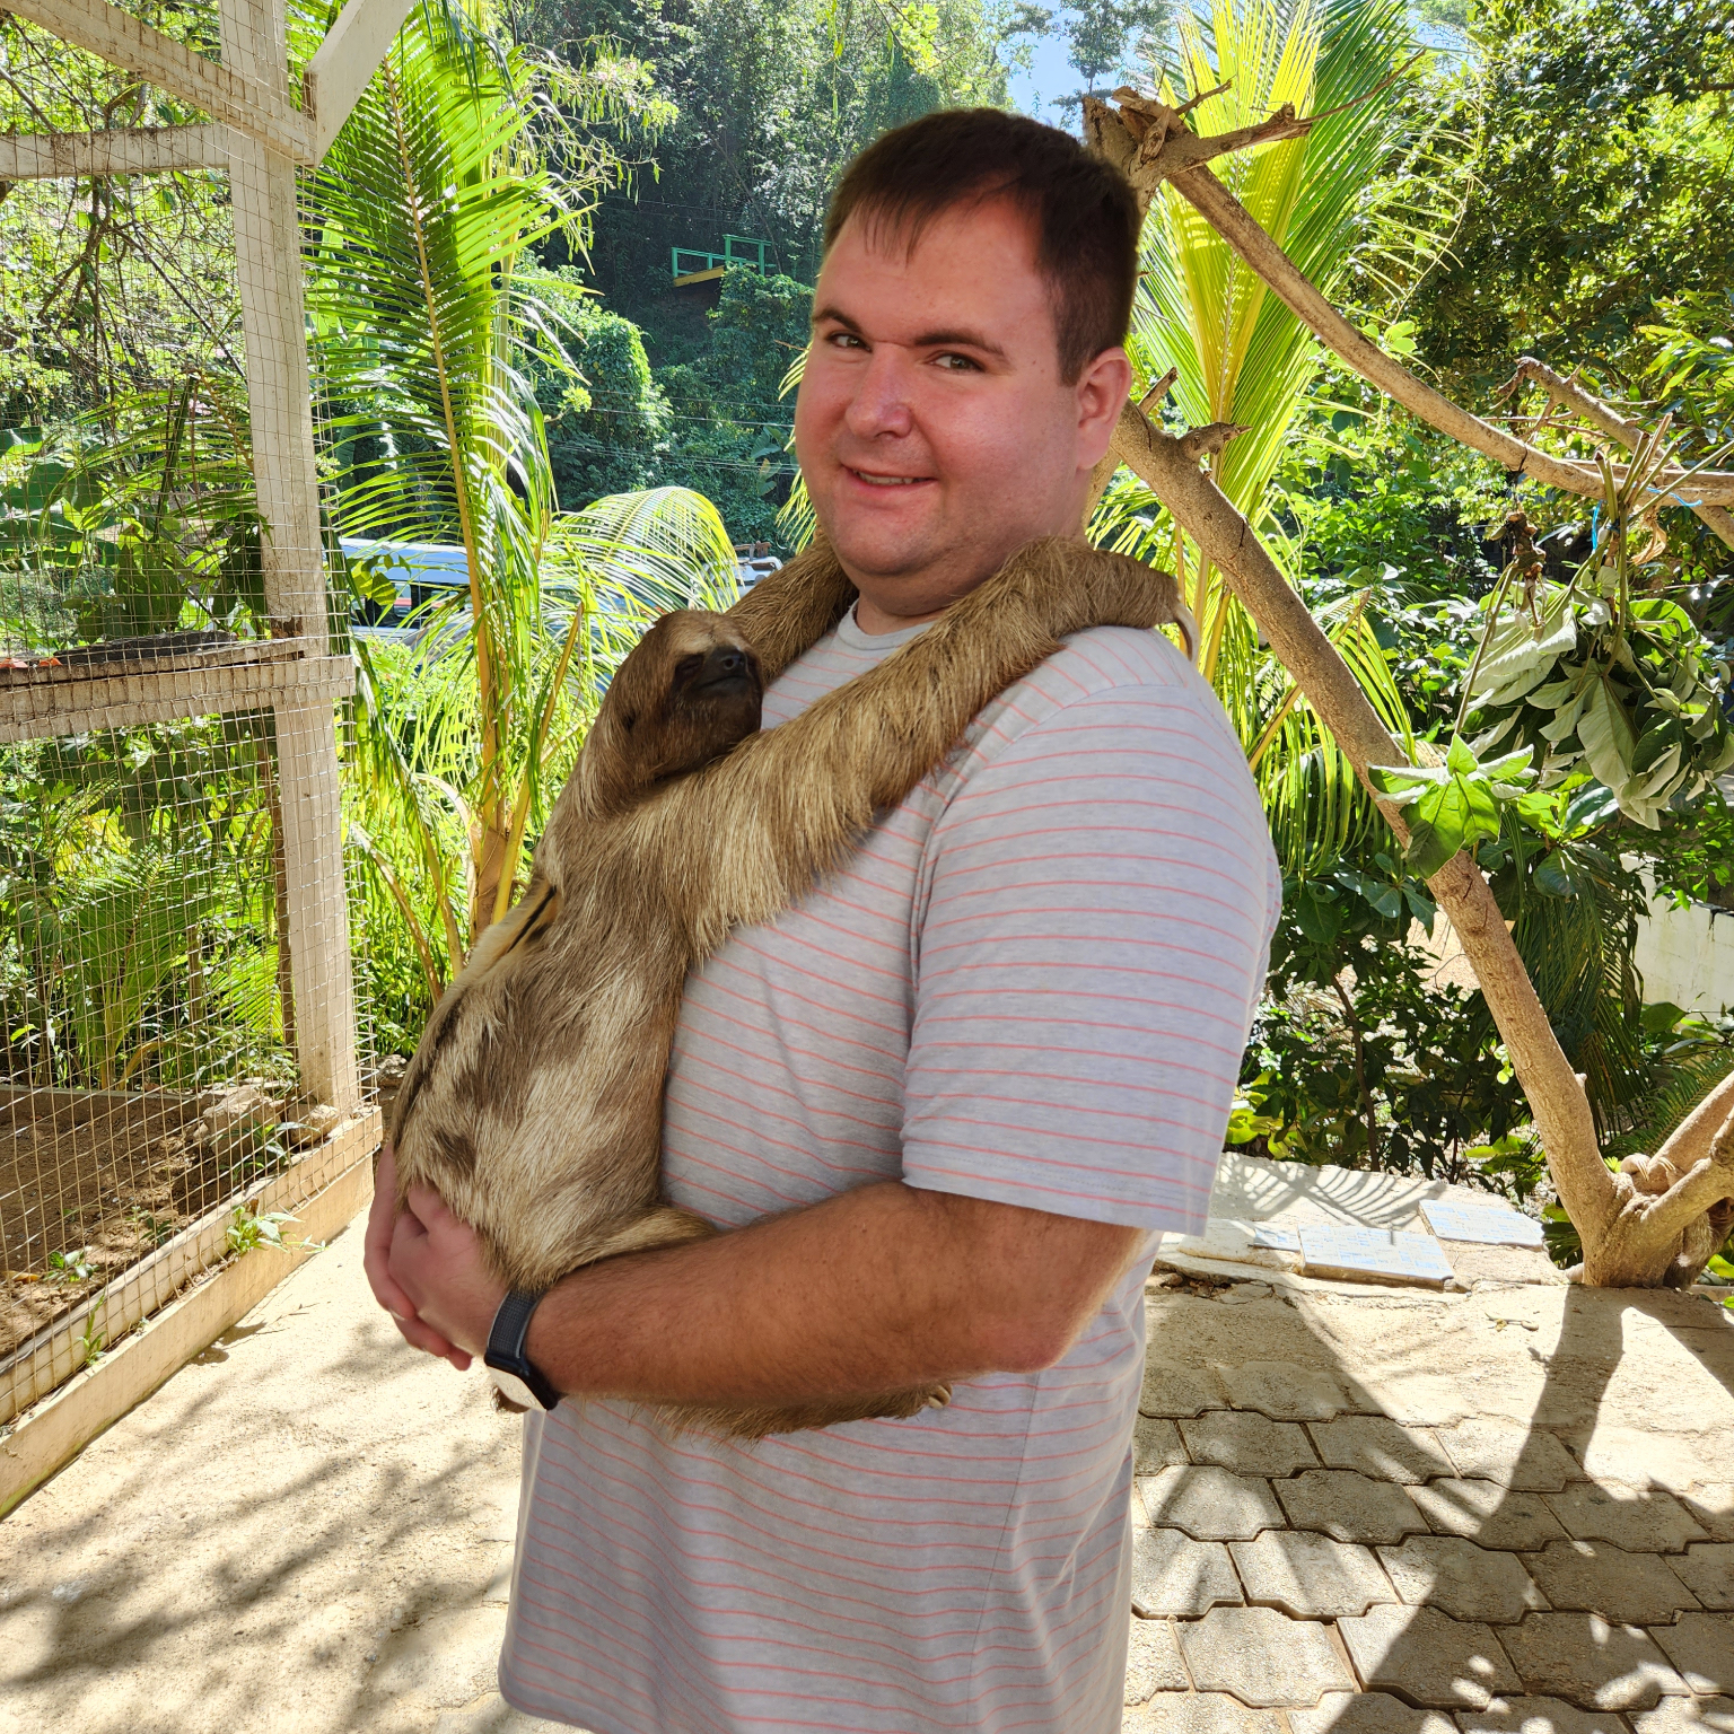 Alec: Meeting the master of 'taking it slow' at the zoo!